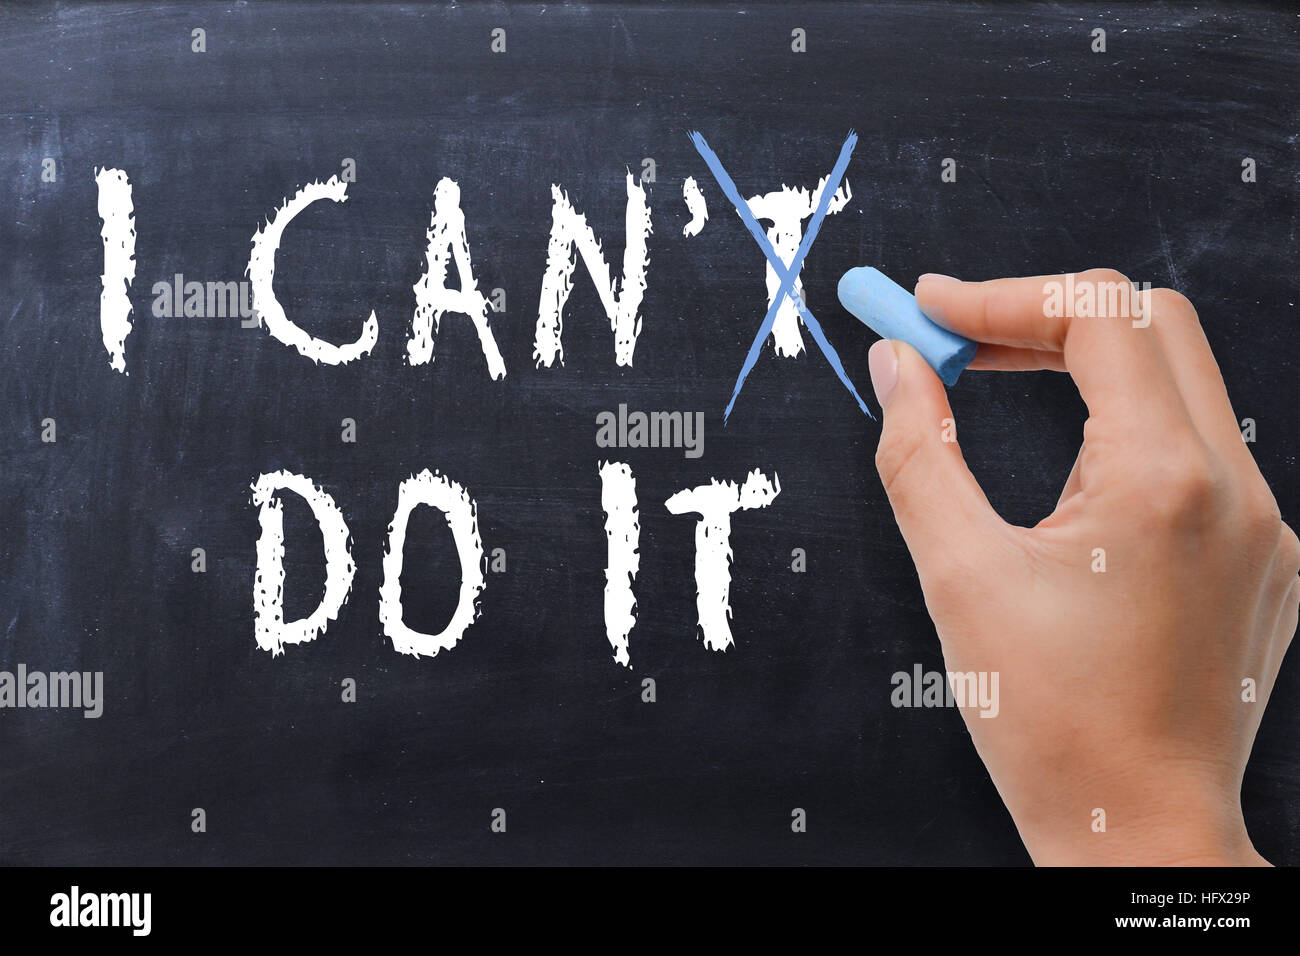 Motivational metaphor on blackboard with woman spelling the phrase “ I can do it” Stock Photo